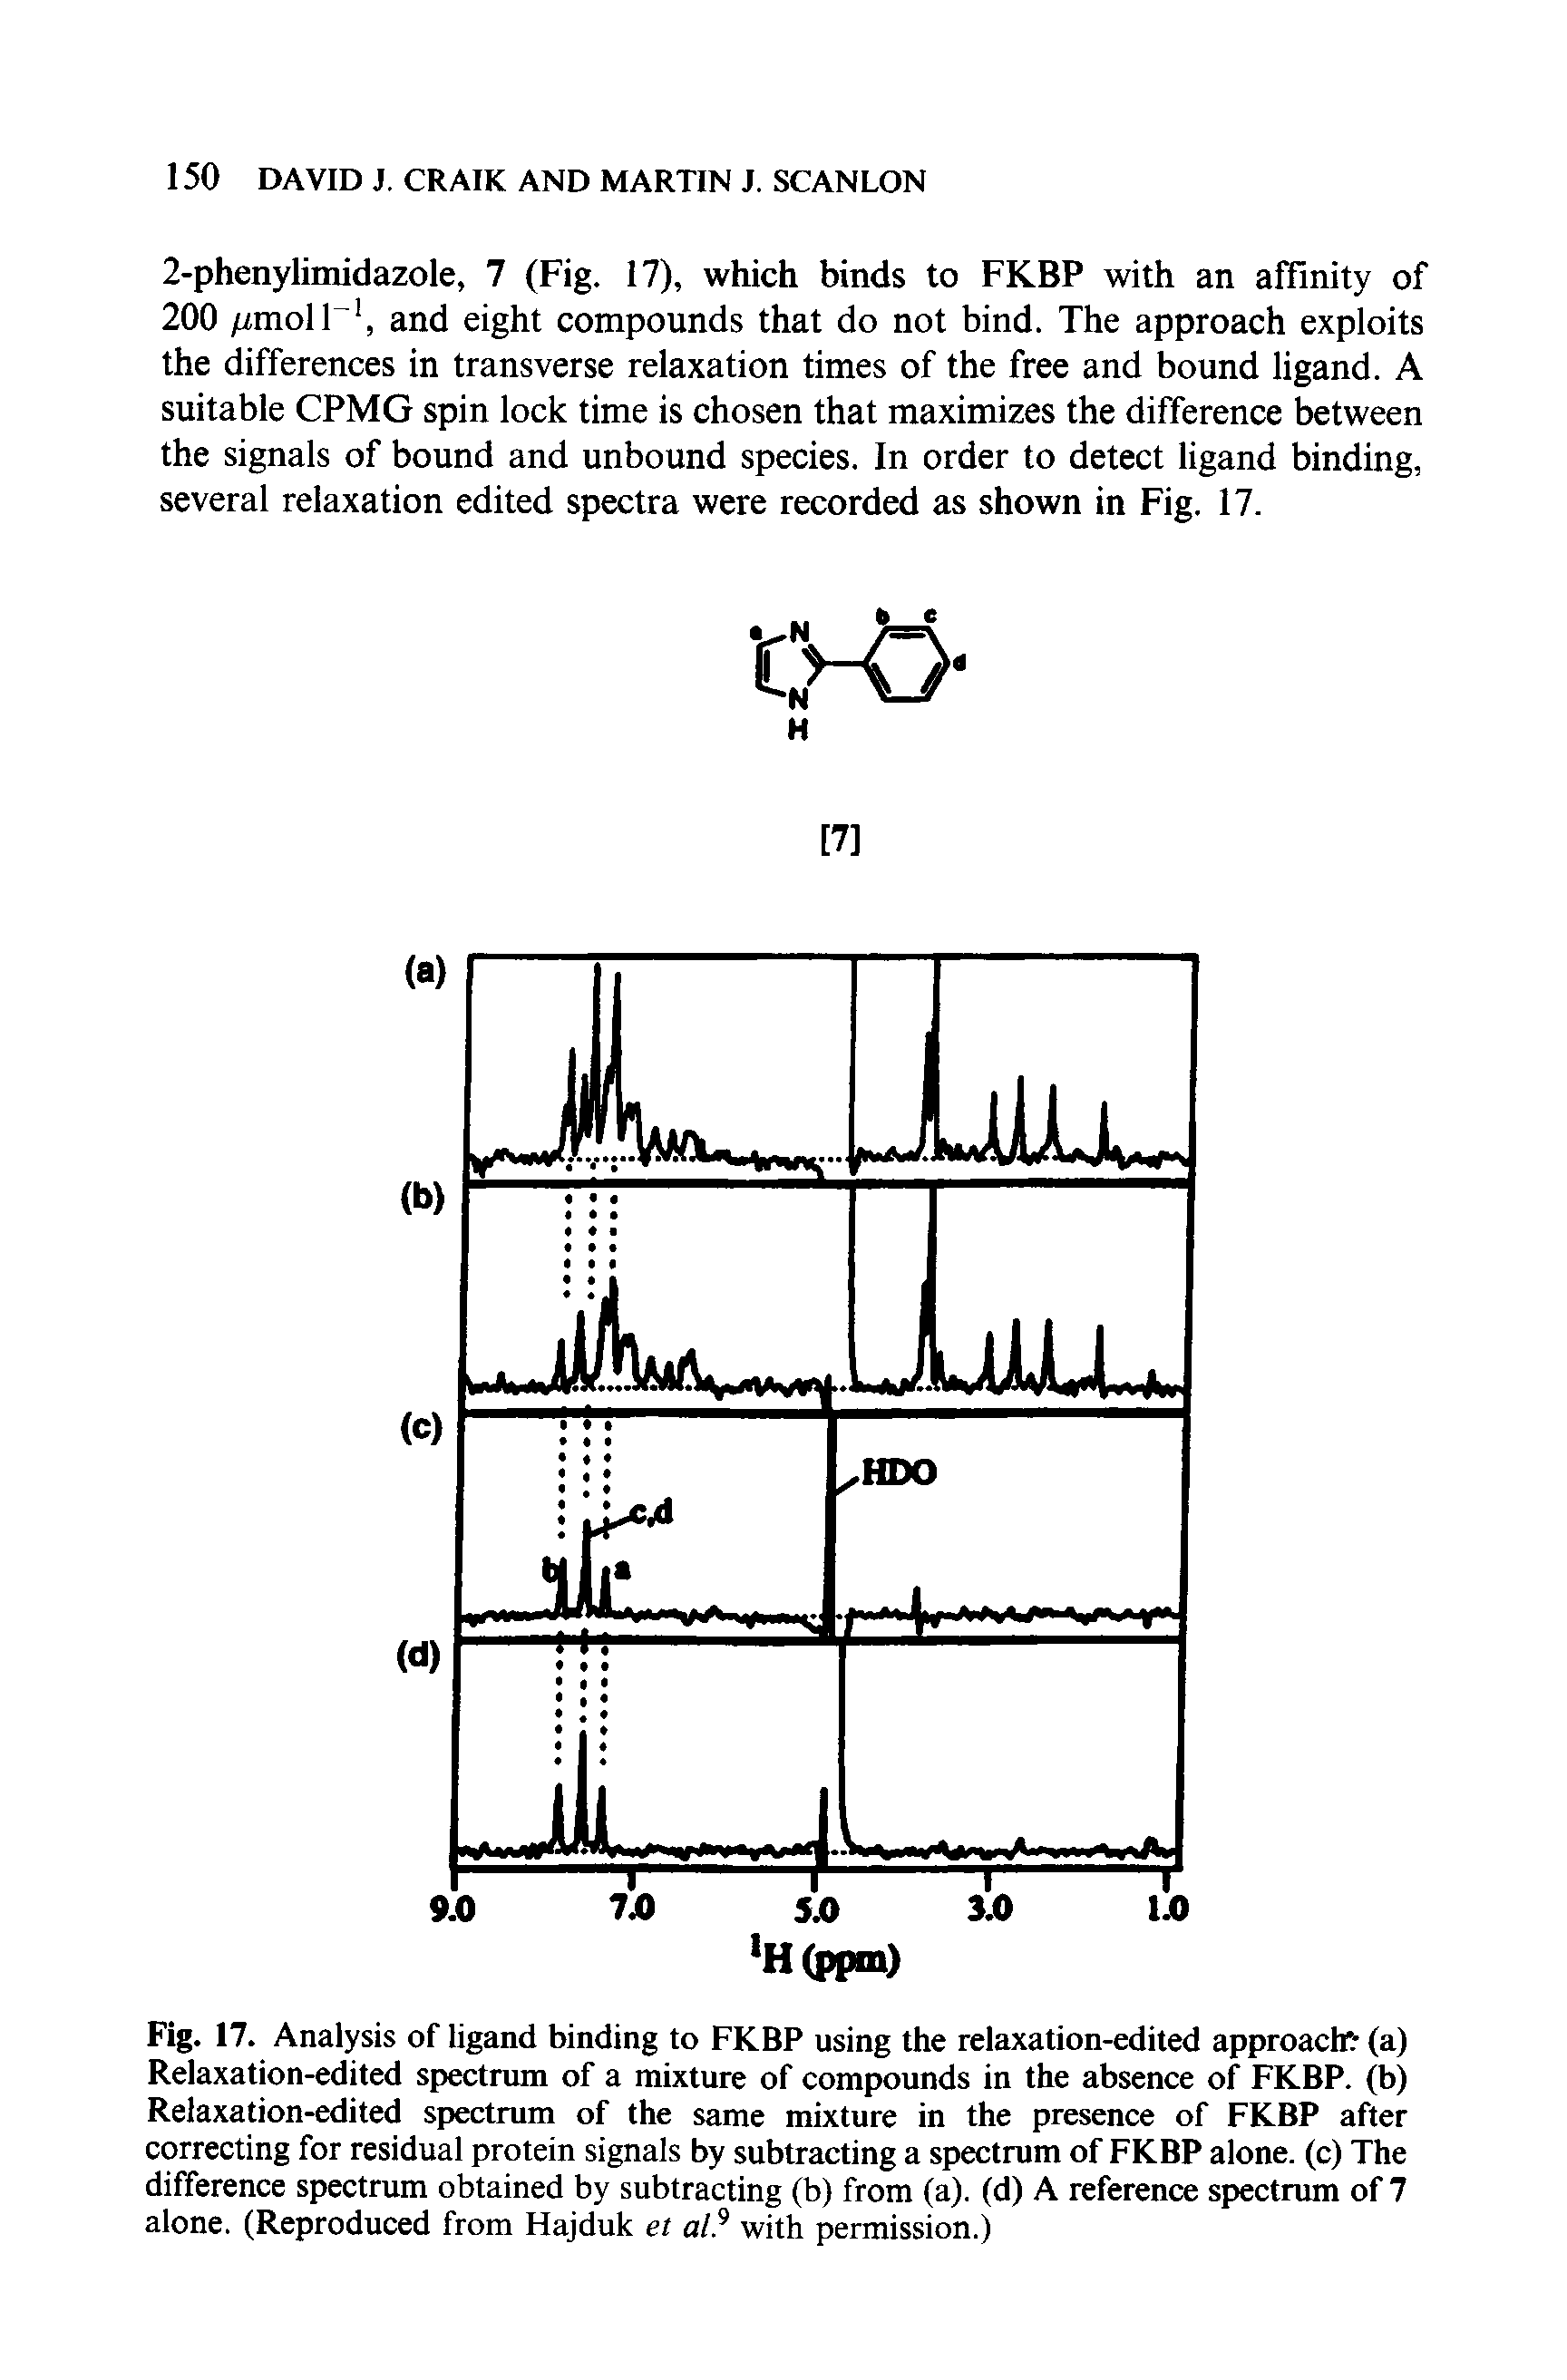 Fig. 17. Analysis of ligand binding to FKBP using the relaxation-edited approach (a) Relaxation-edited spectrum of a mixture of compounds in the absence of FKBP. (b) Relaxation-edited spectrum of the same mixture in the presence of FKBP after correcting for residual protein signals by subtracting a spectrum of FKBP alone, (c) The difference spectrum obtained by subtracting (b) from (a), (d) A reference spectrum of 7 alone. (Reproduced from Hajduk et al with permission.)...